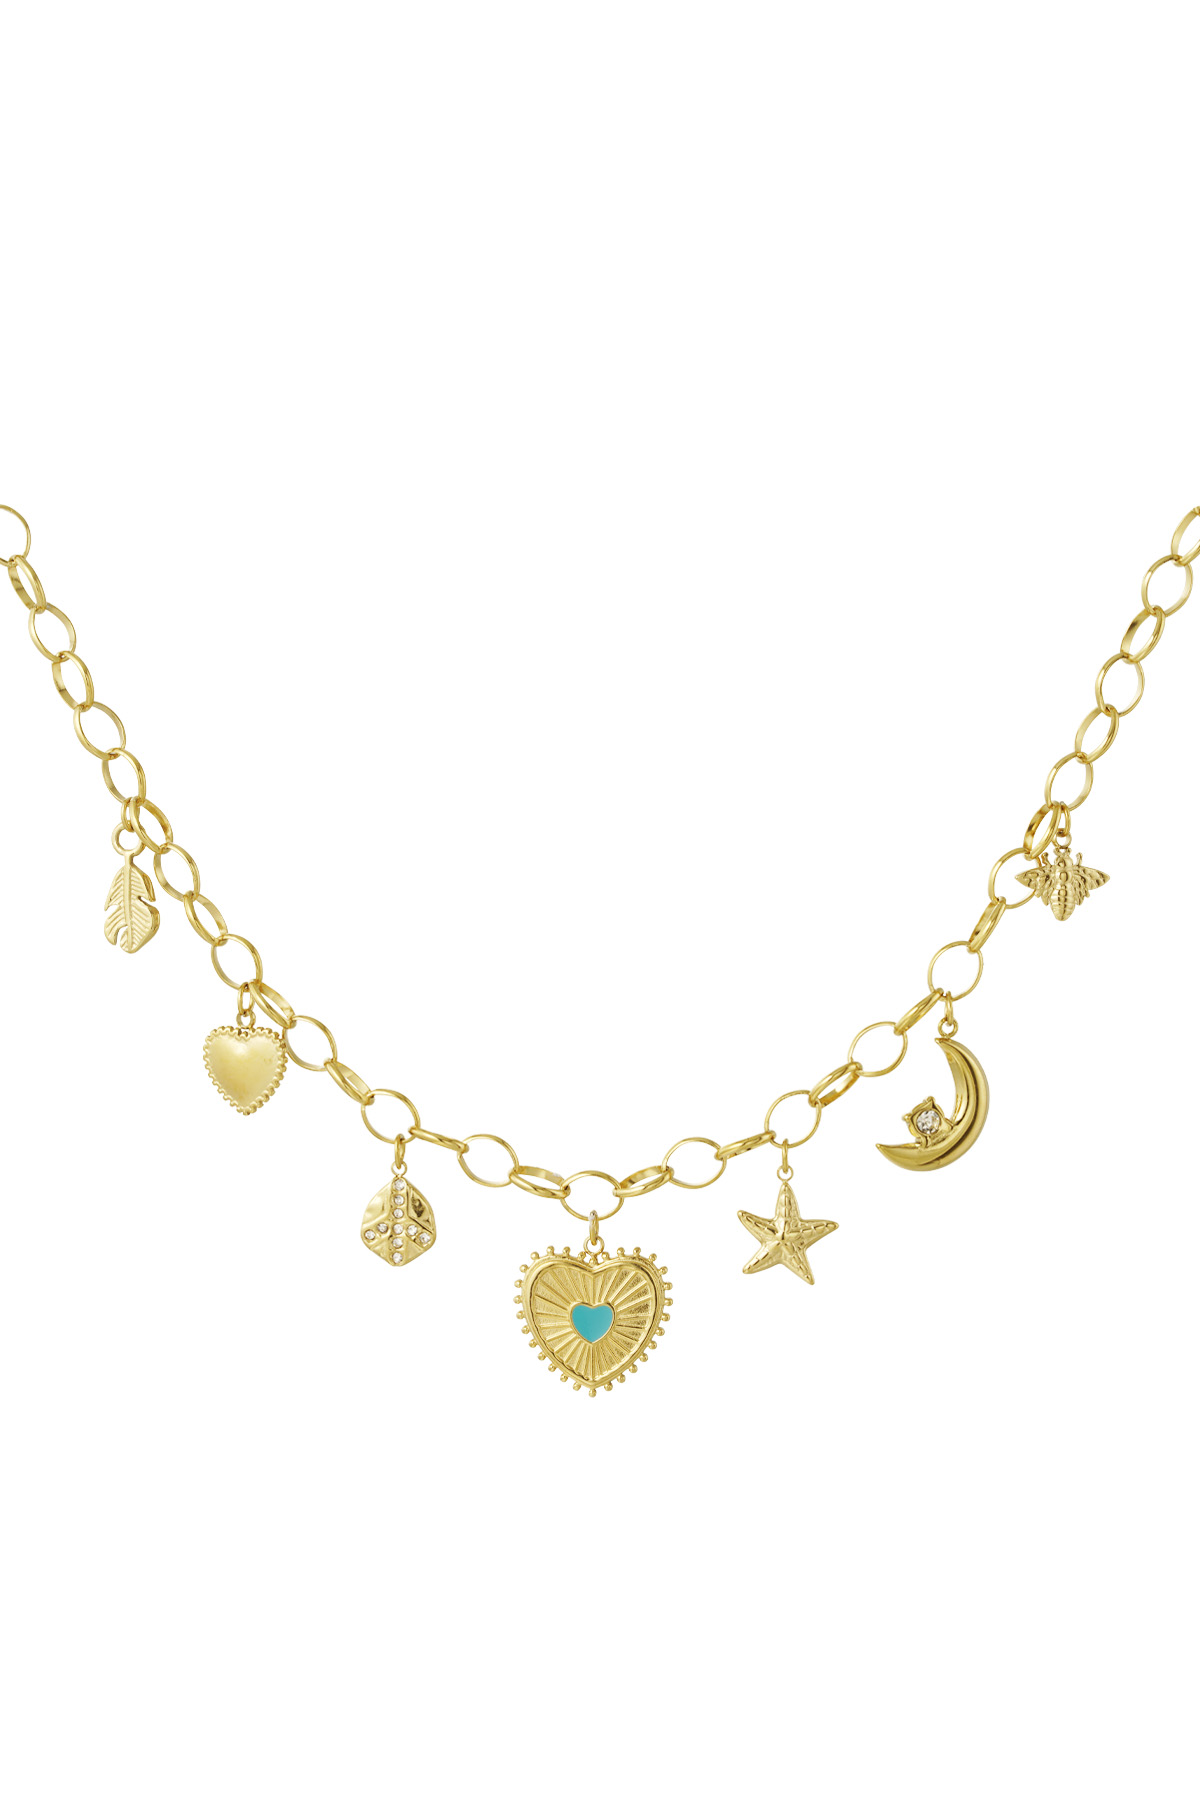 Sunny love charm necklace - gold  h5 